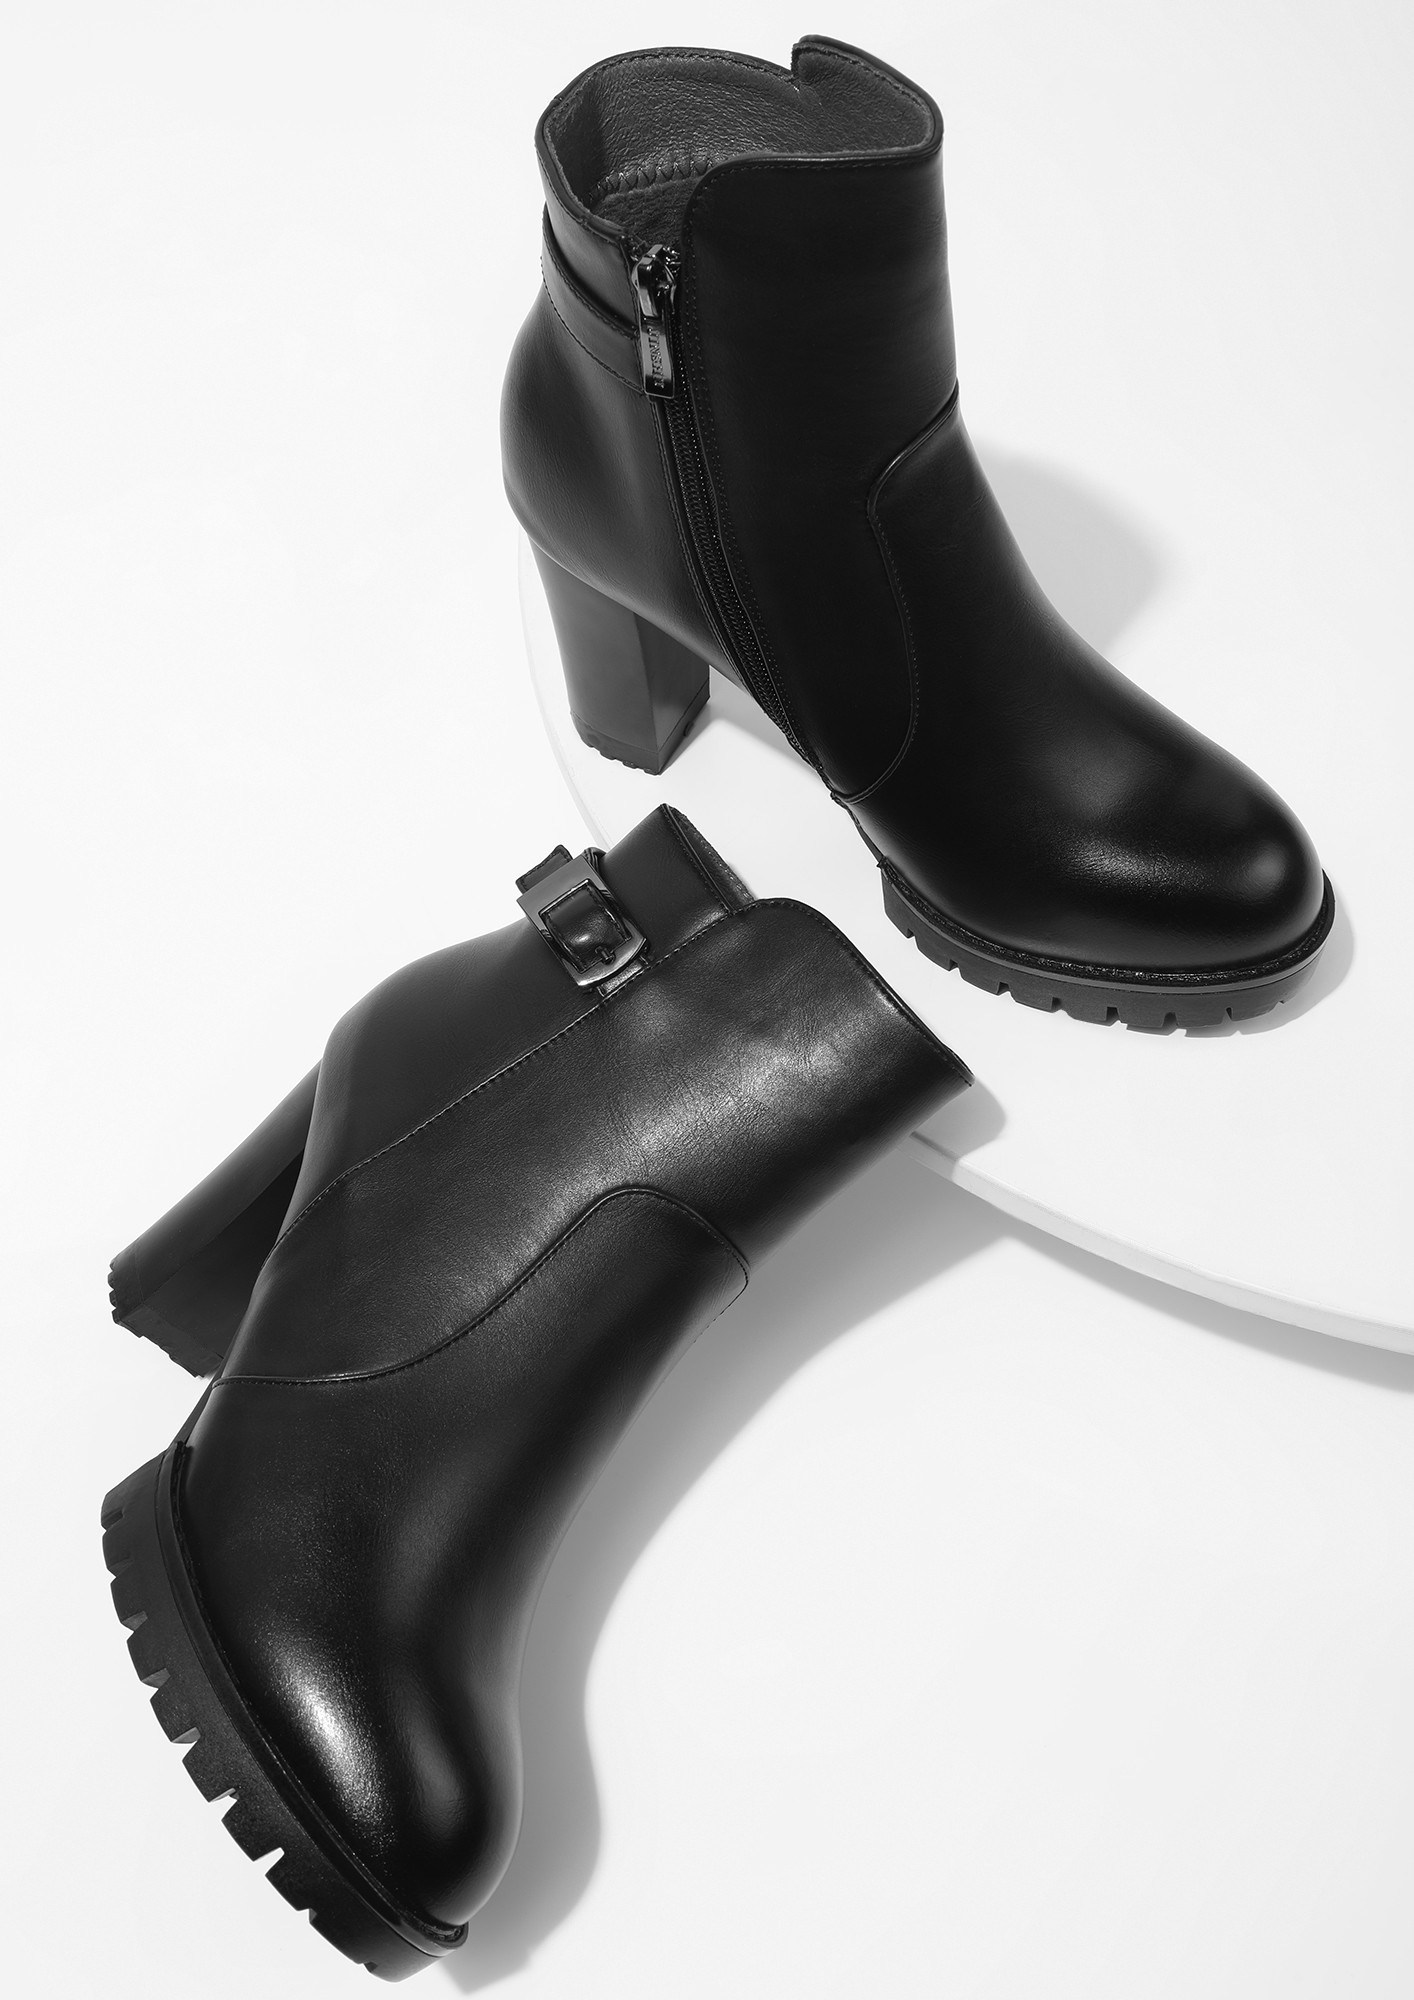 Women's Heeled Ankle Boots | Explore our New Arrivals | ZARA United States-hkpdtq2012.edu.vn